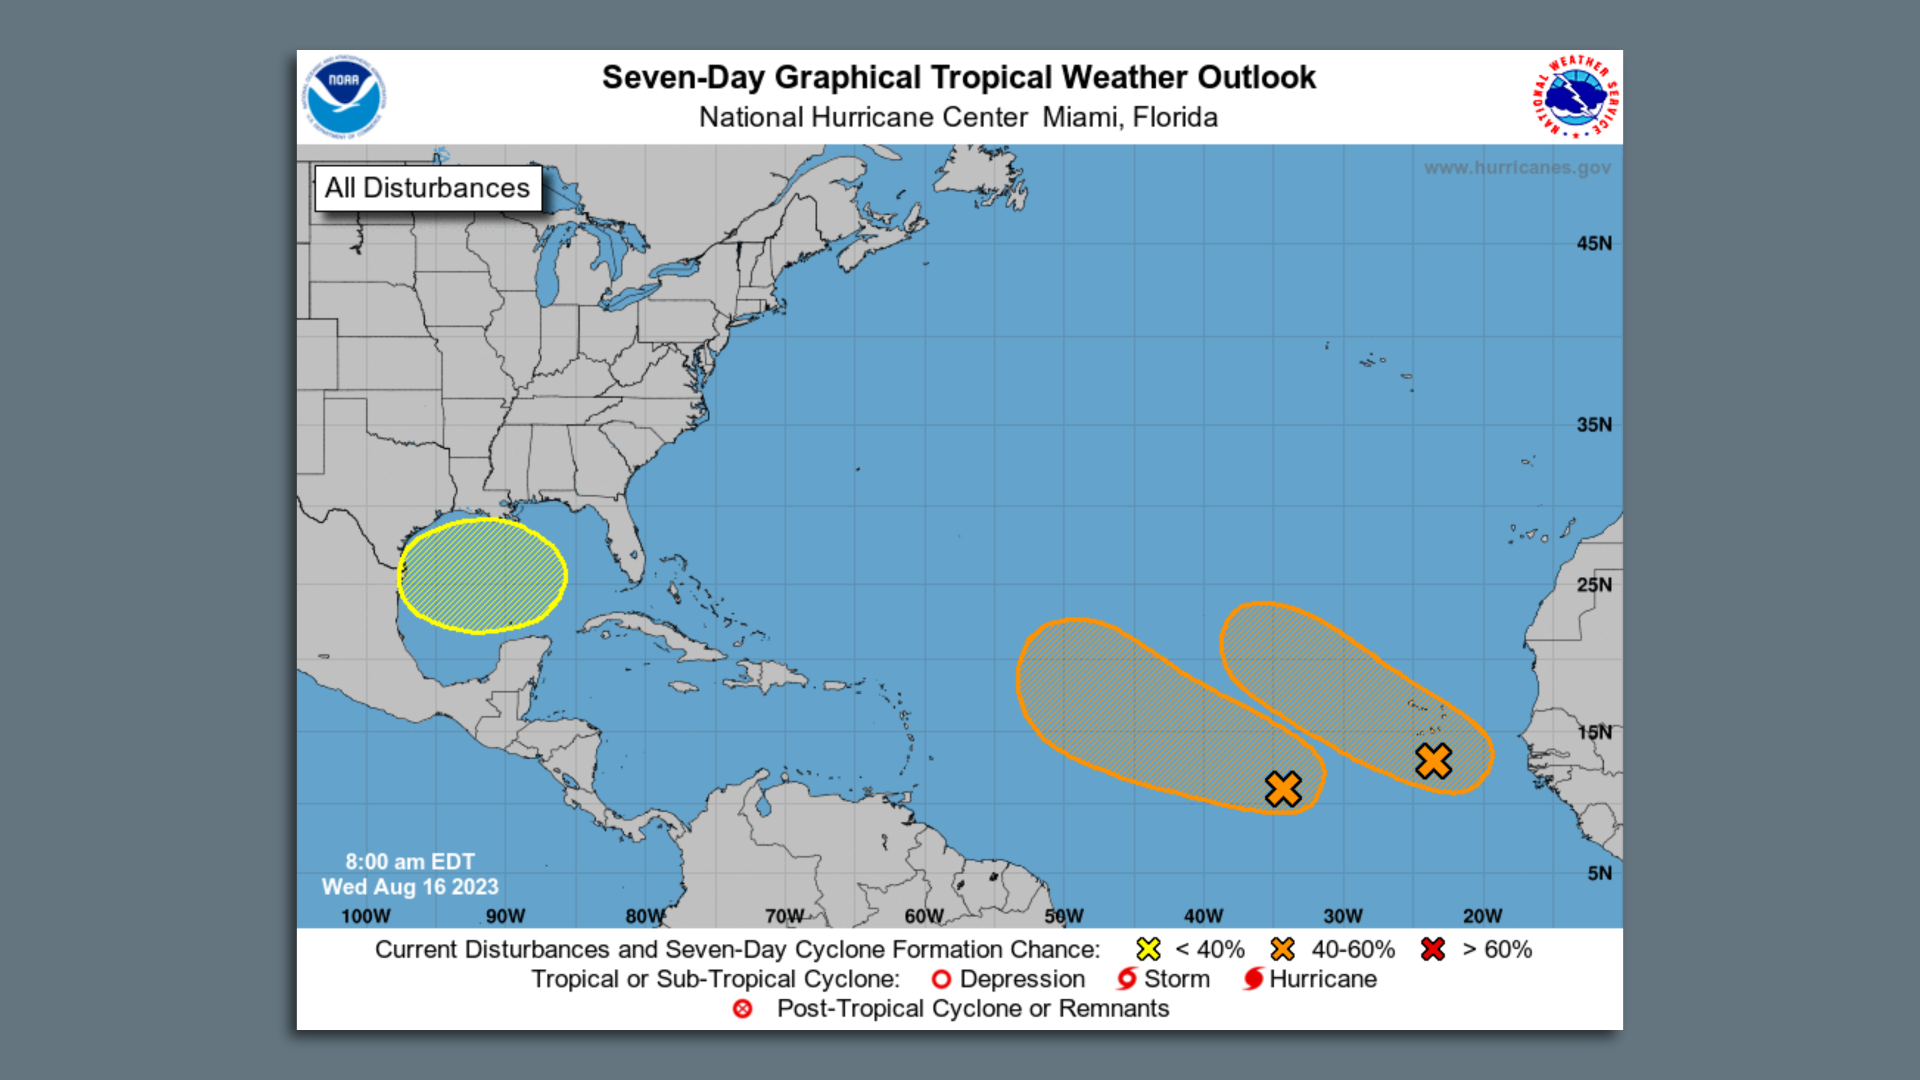 Image shows a map of the tropics with three shaded areas in the Gulf of Mexico and Atlantic